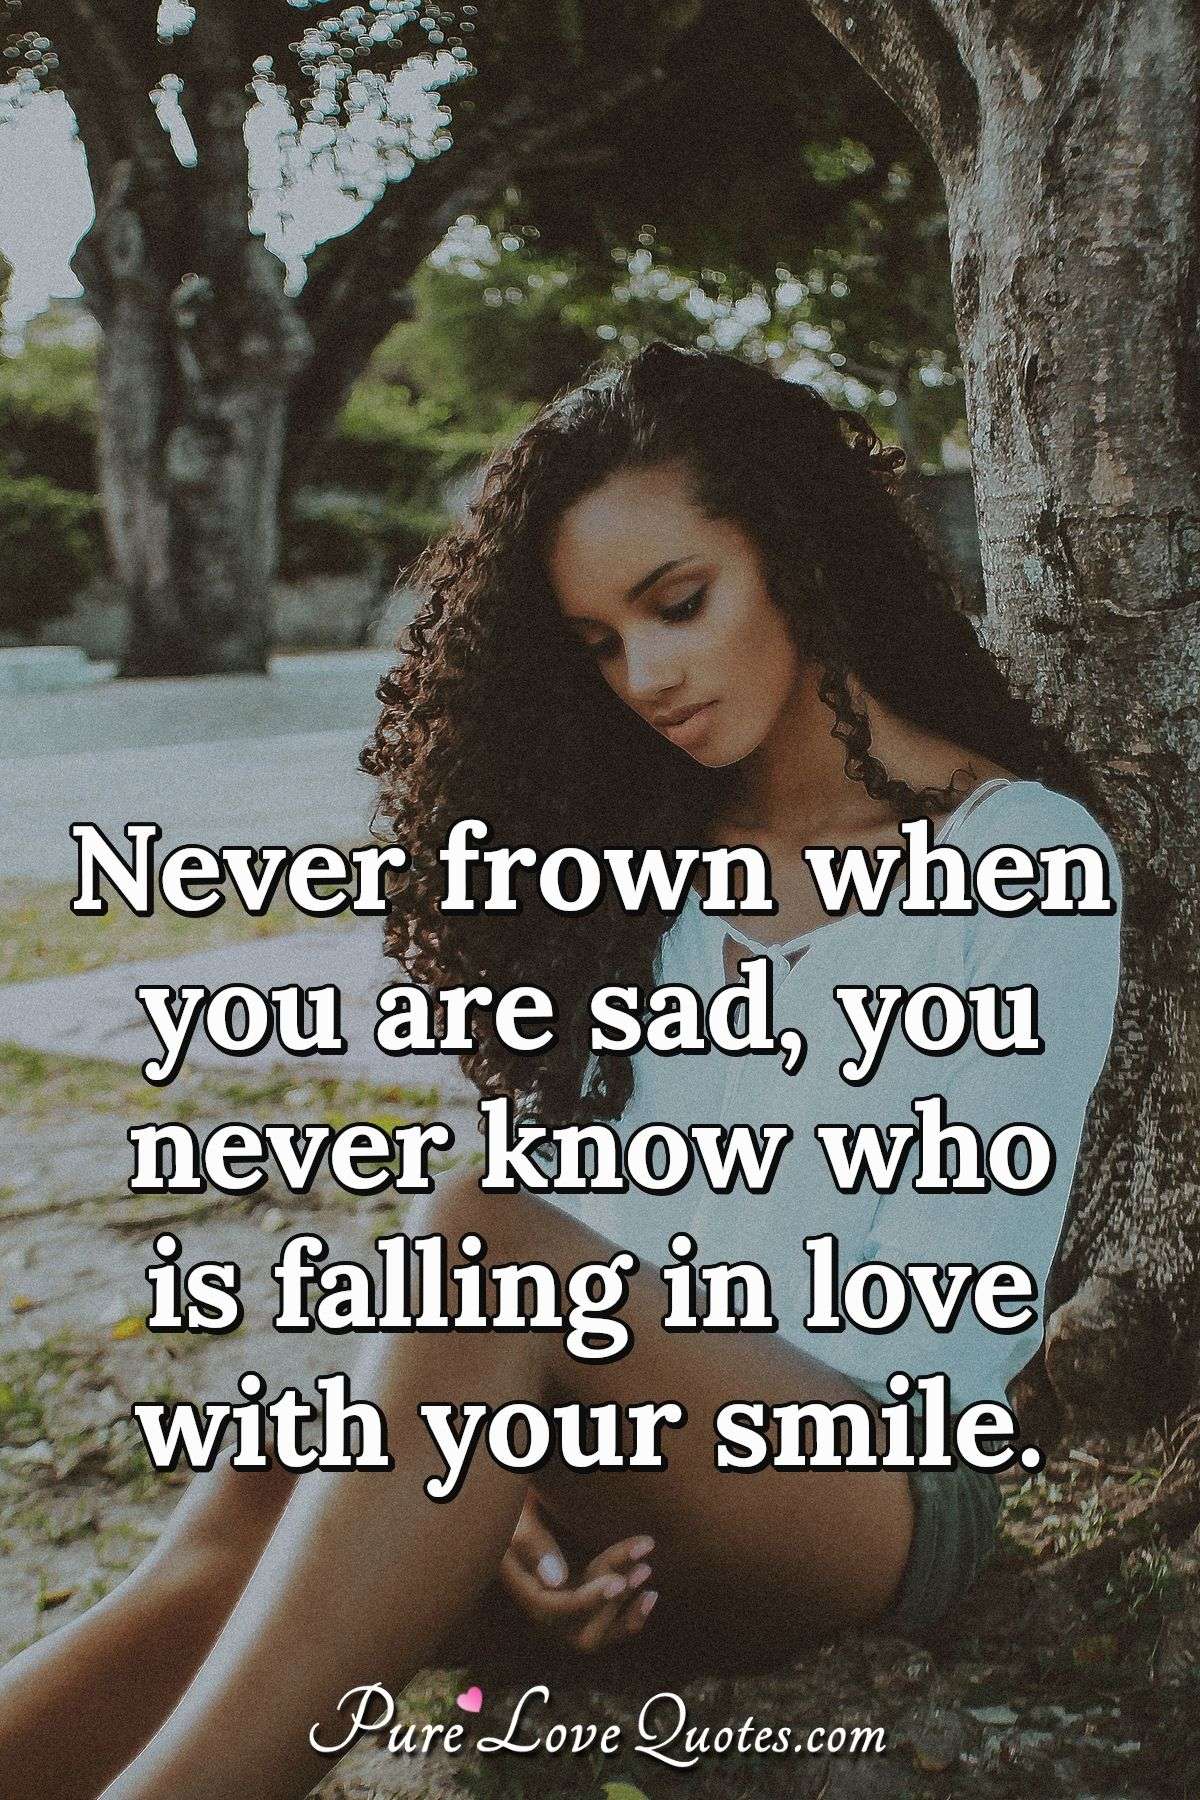 Never frown when you are sad, you never know who is falling in love with your smile. - Anonymous